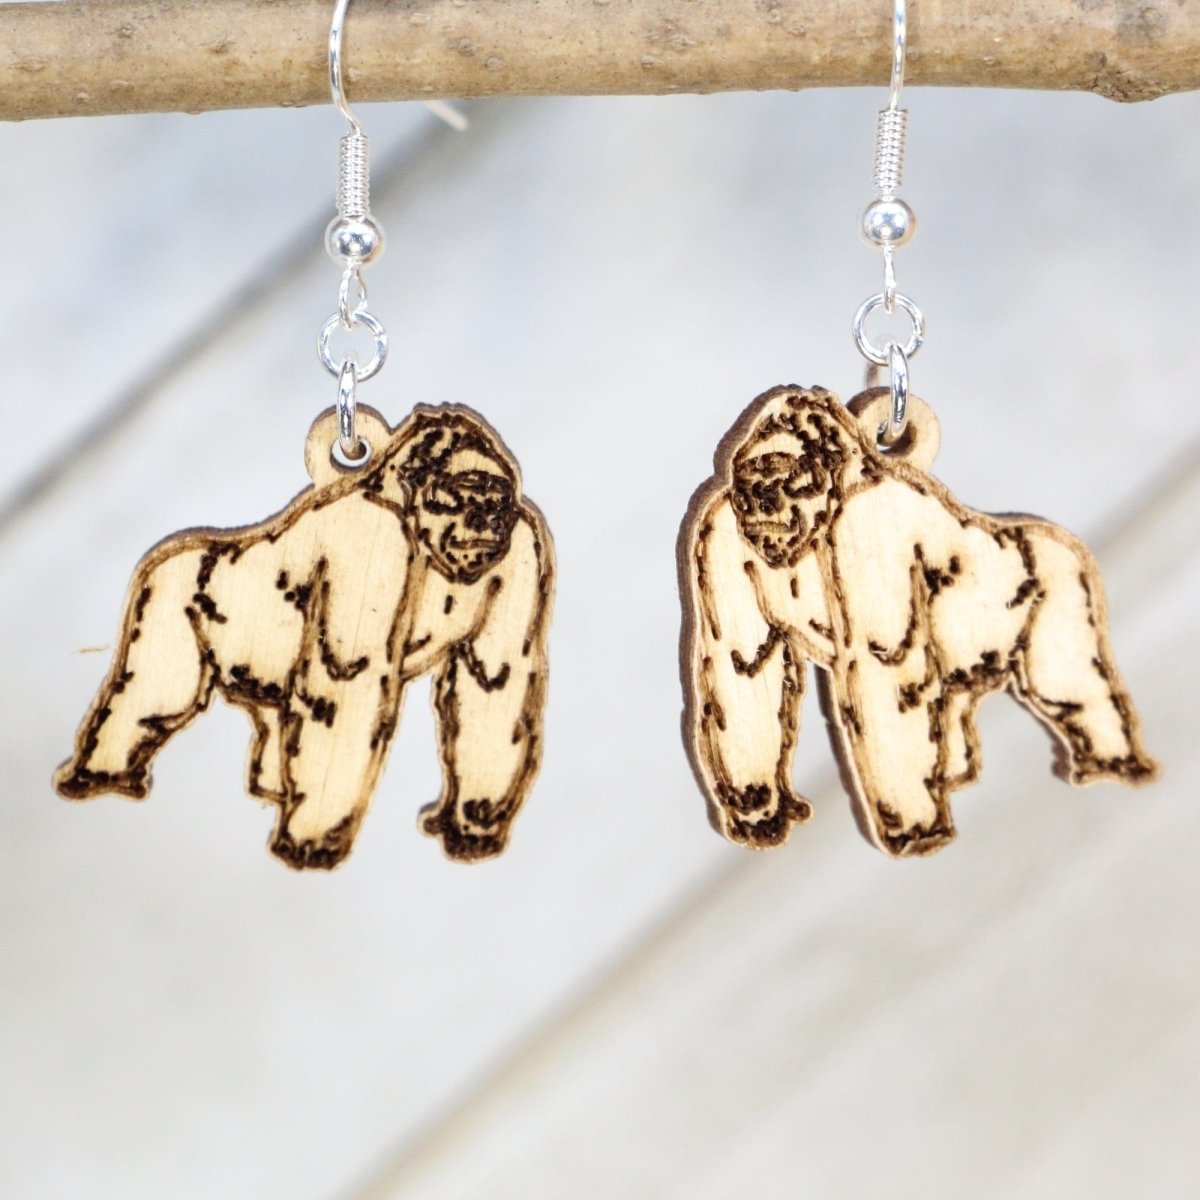 Wild Gorilla Wooden Earrings - - Cate's Concepts, LLC